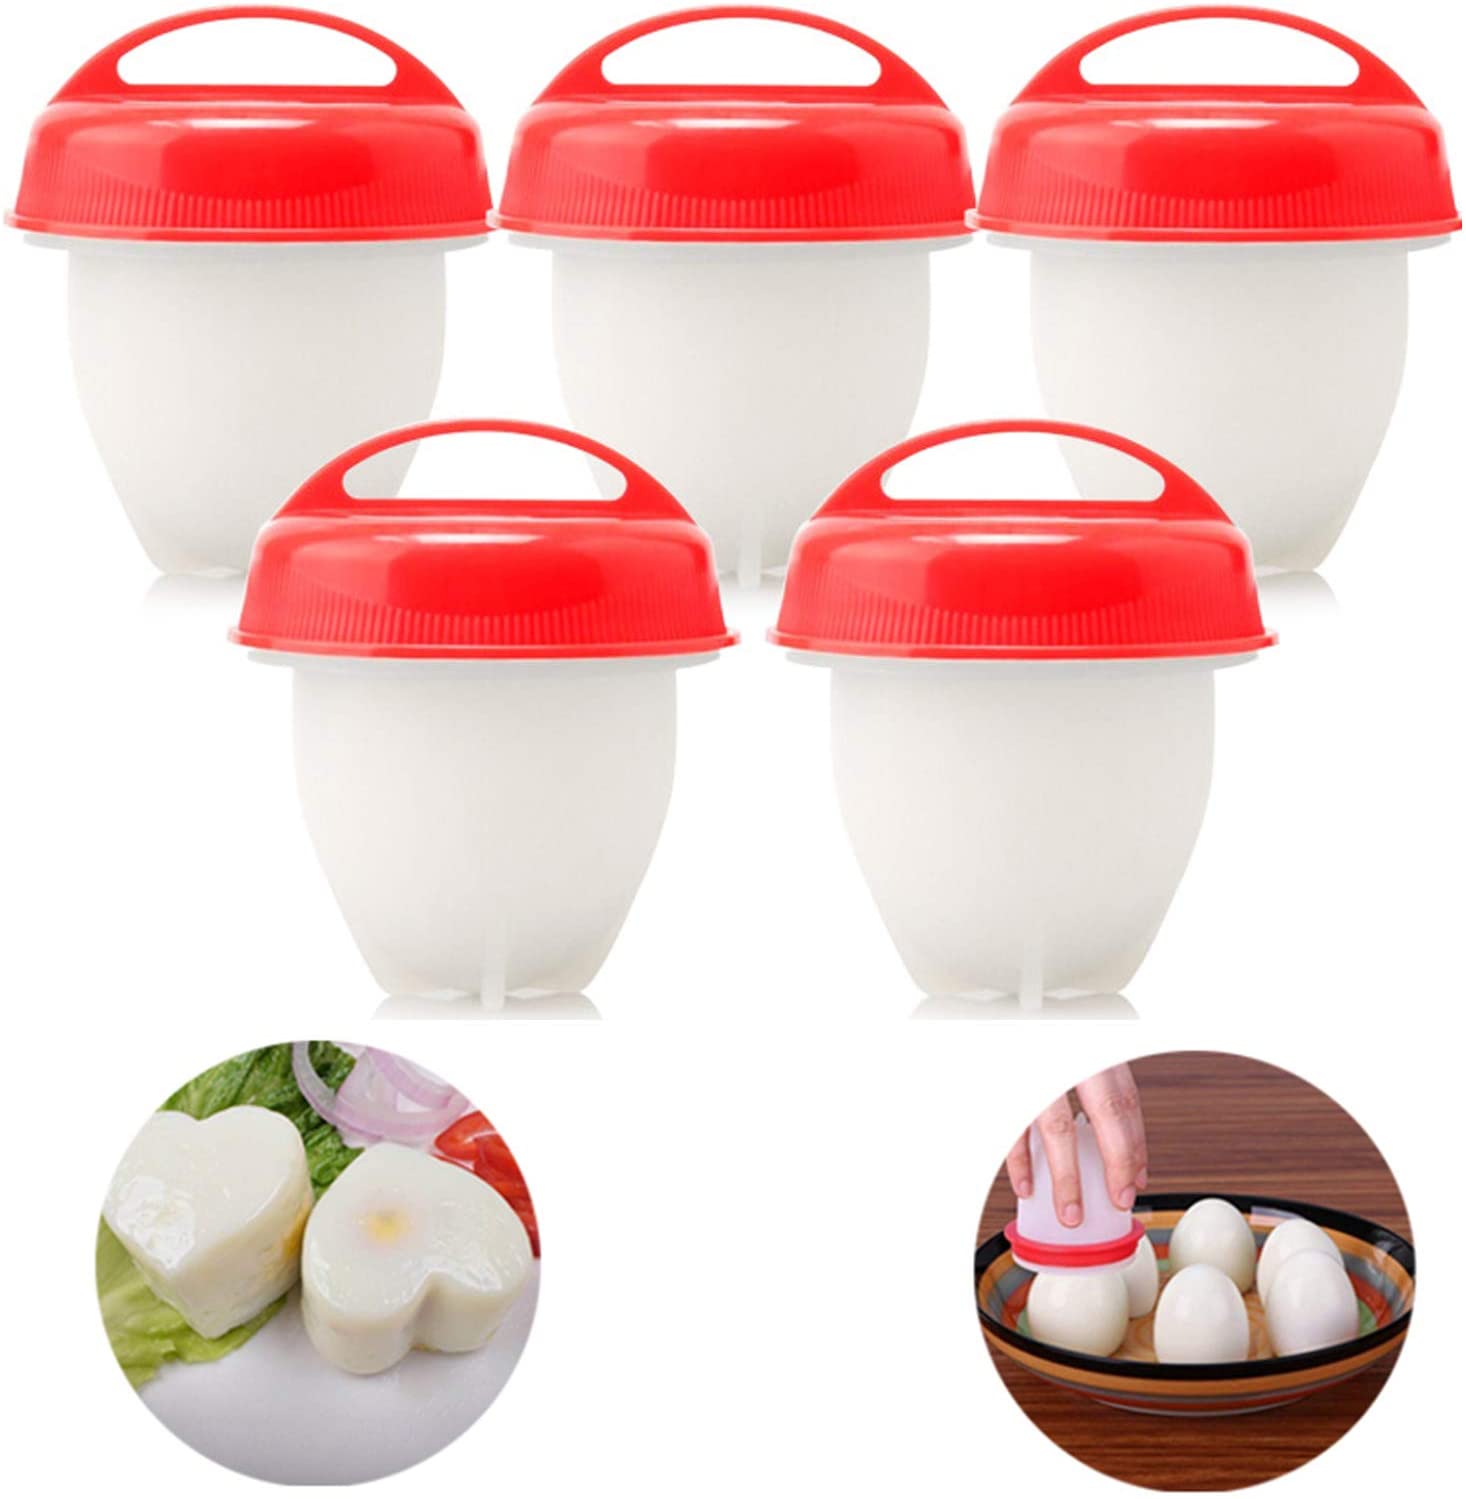 Jixista Egg Cooker Silicone Set Egg Boiler Without Bowl Easy Eggs Non Stick Silicone Boiled Steamer Egg Cooker Cooking Cup Great Handling, Easy to Clean, Non-Stick Boiled Eggs Kitchen Aid 6 Pieces